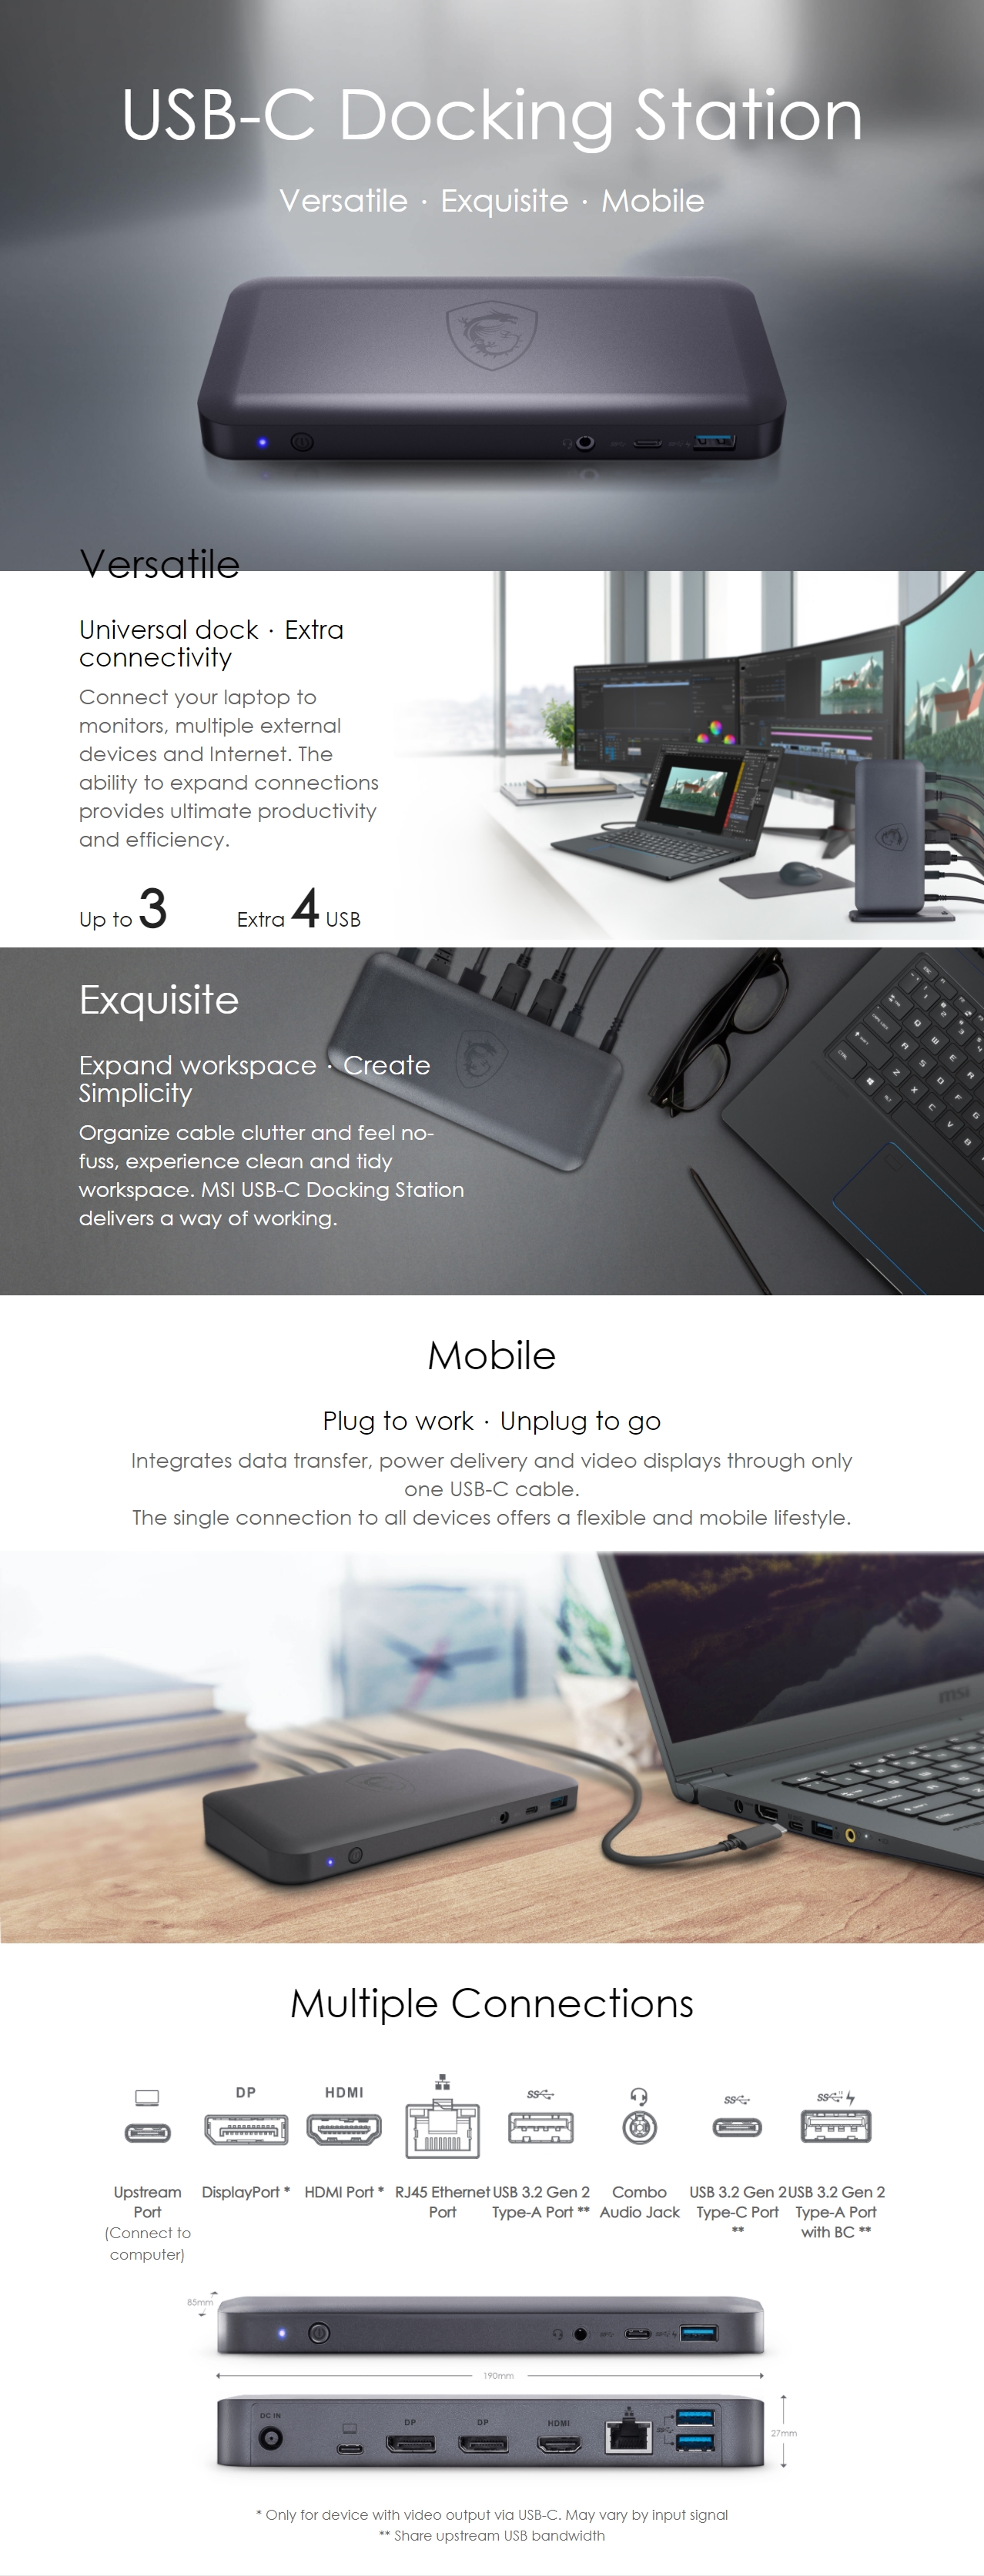 A large marketing image providing additional information about the product MSI USB C Notebook Docking Station - Additional alt info not provided